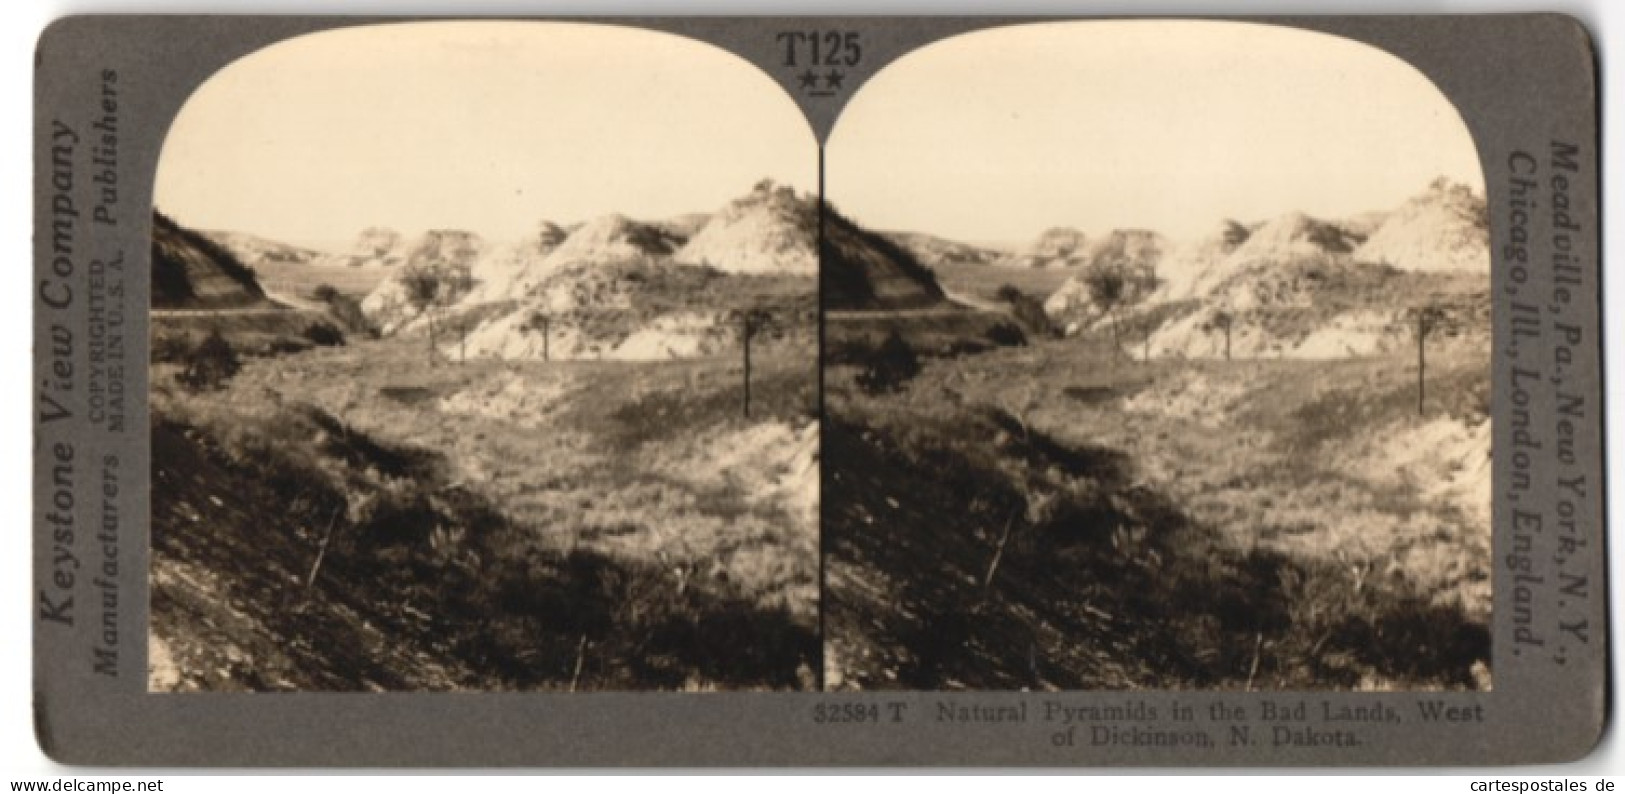 Stereo-Fotografie Keystone View Co., Meadville / PA., Ansicht Dickinson / ND, Natural Pyramids In The Bad Lands  - Stereo-Photographie